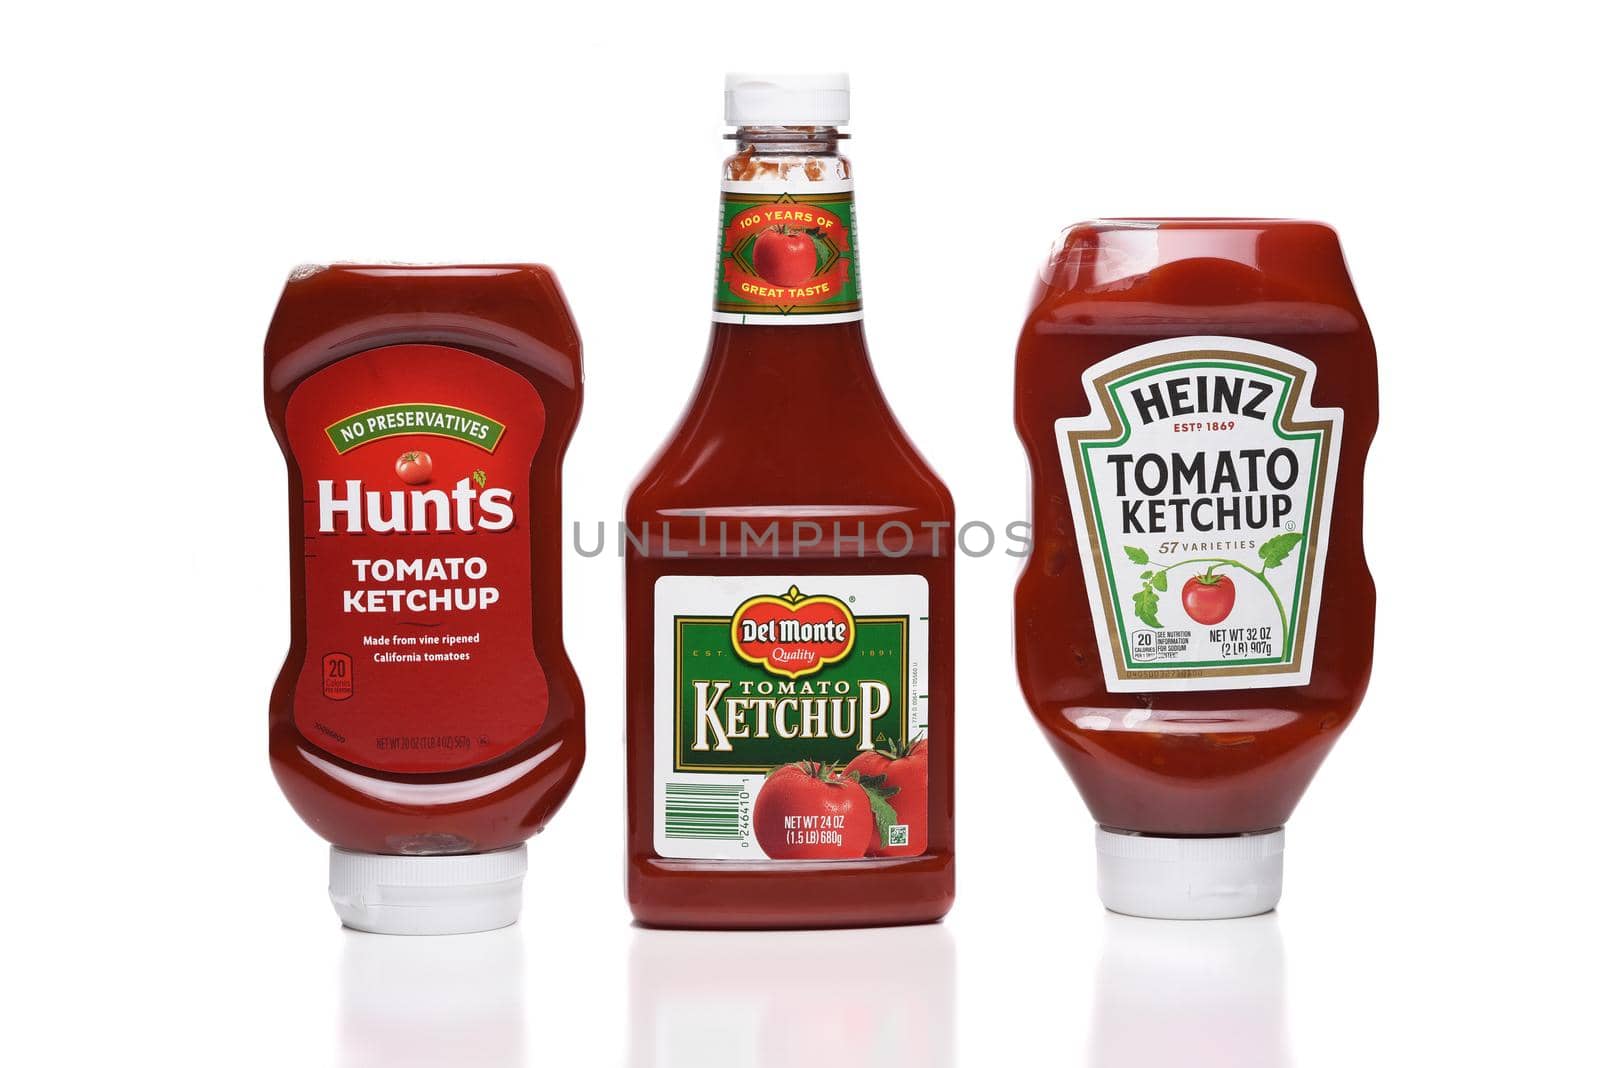 IRVINE, CALIFORNIA - 09 AUG 2020: Three bottles of the most popular Ketchups, Heinz, Hunts, and Del Monte